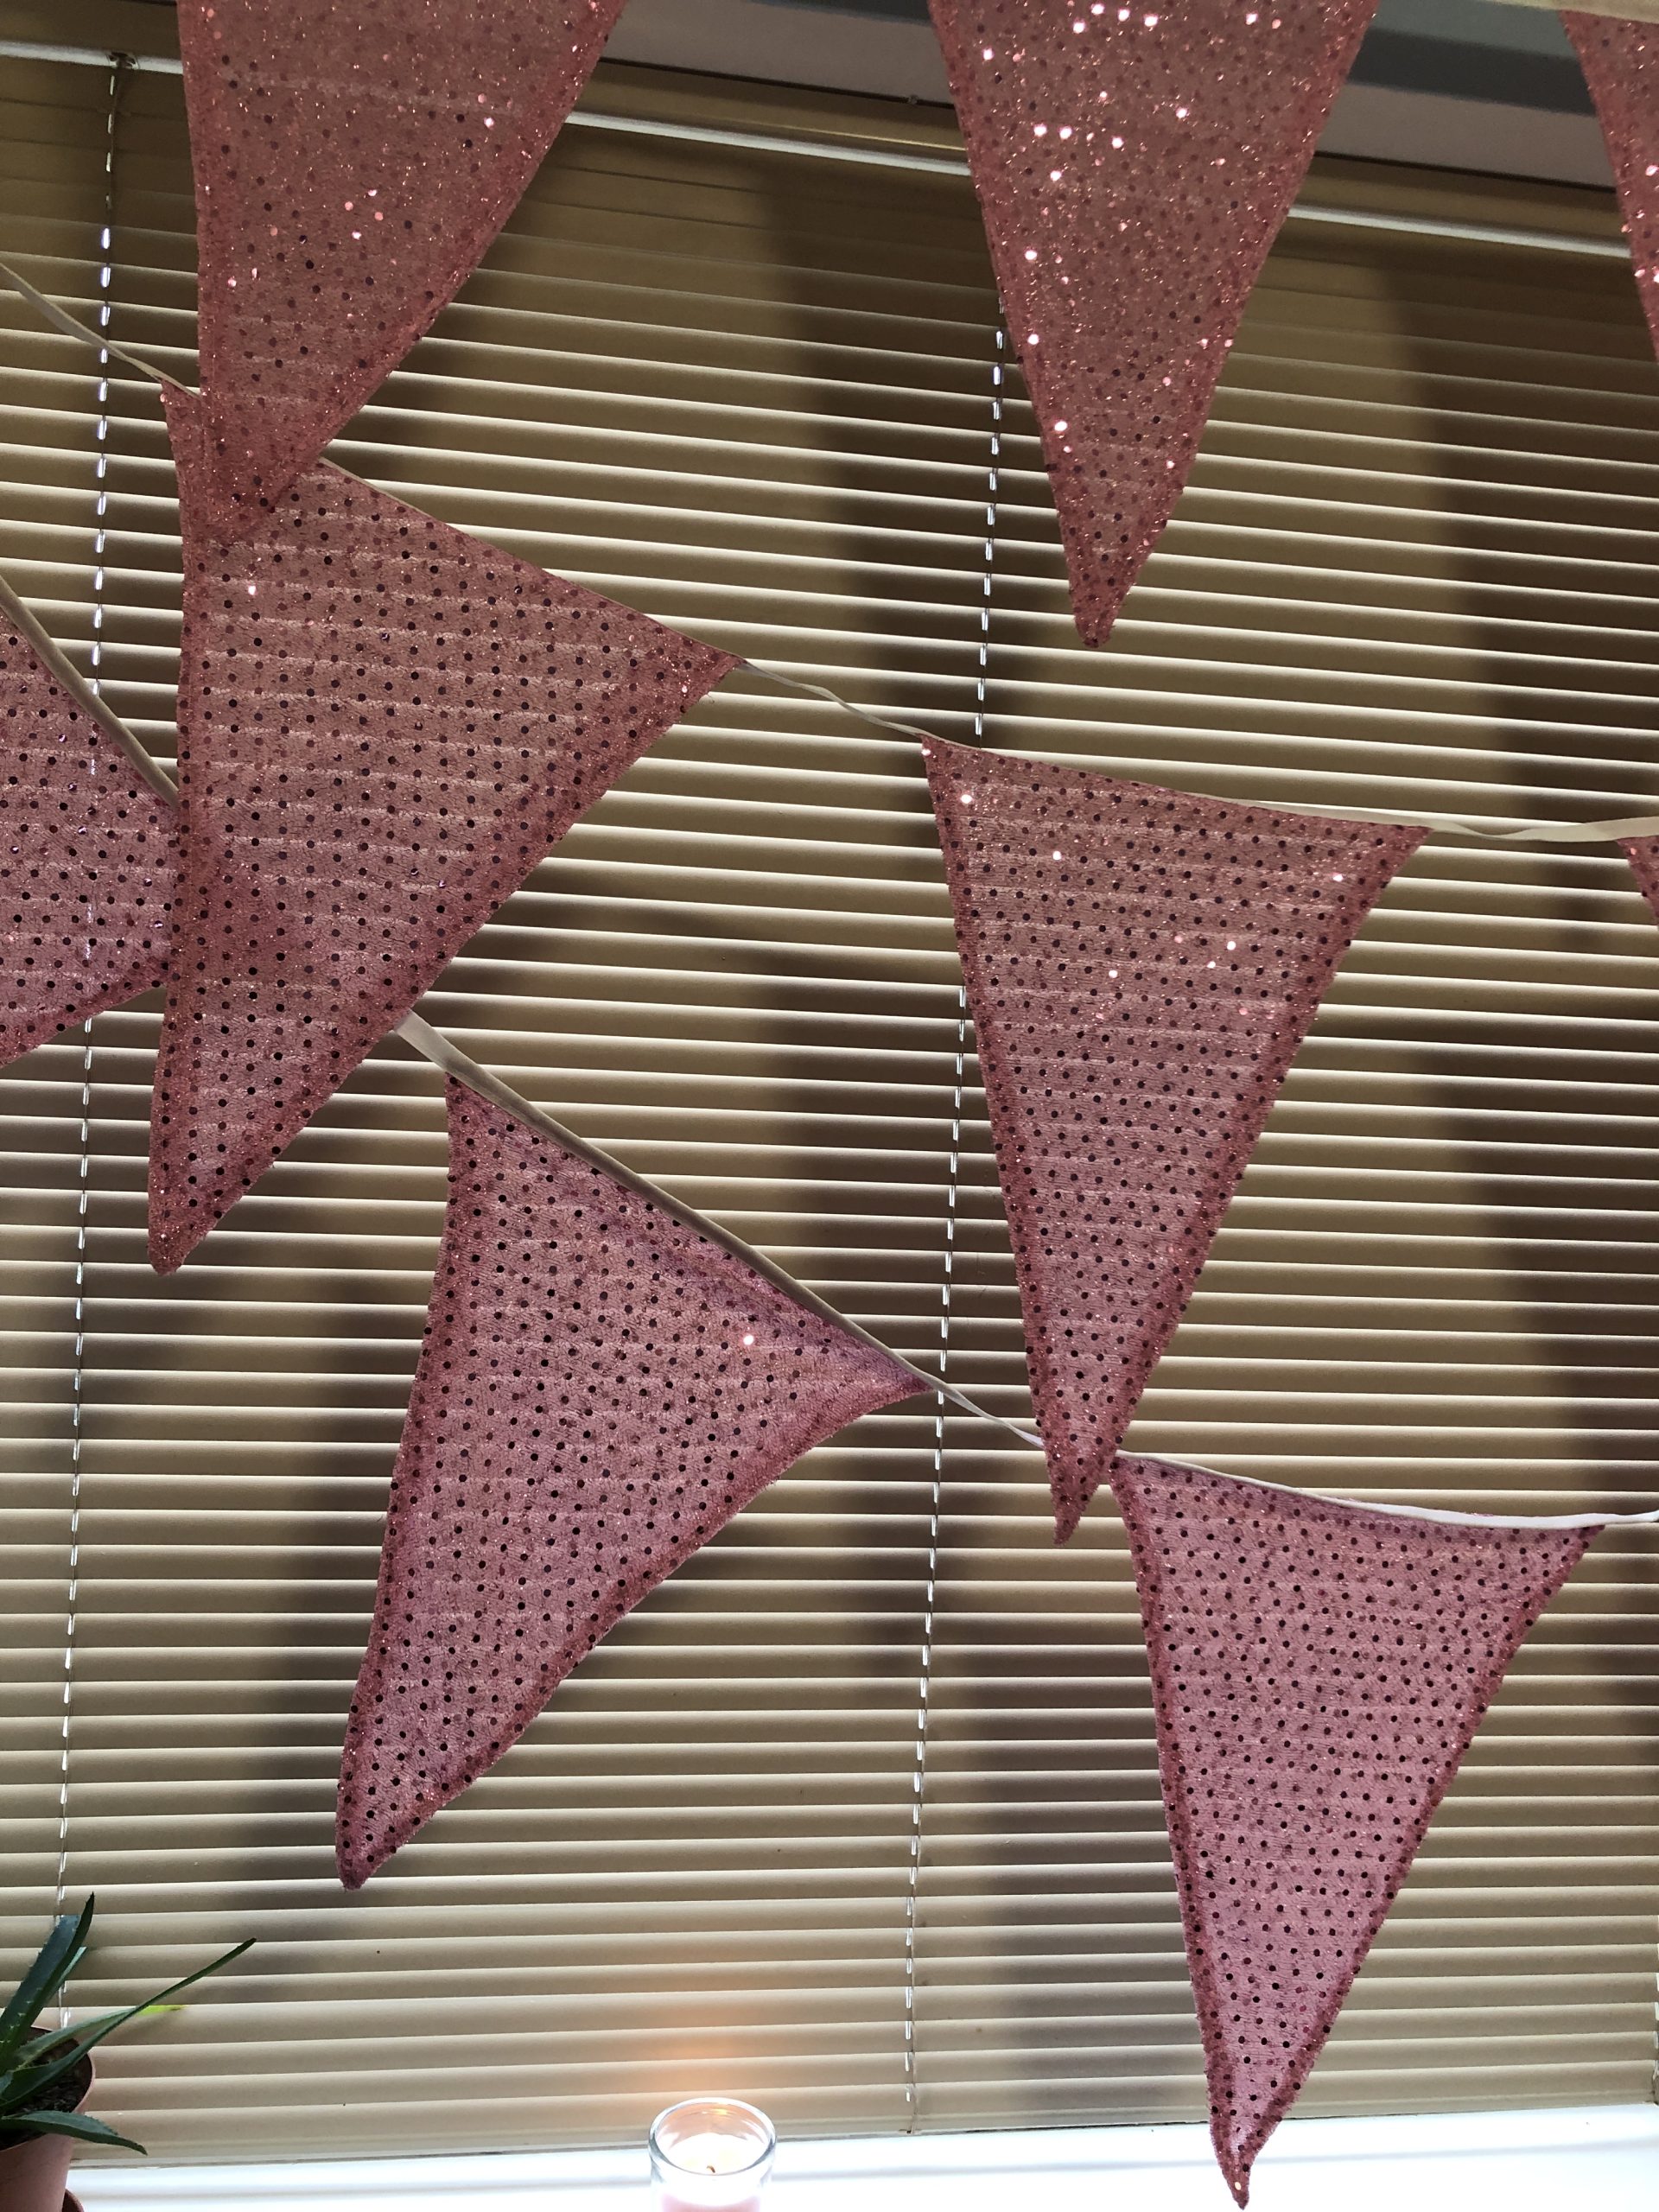 Extra large bunting flags made from pink sparkly sequinned fabric.